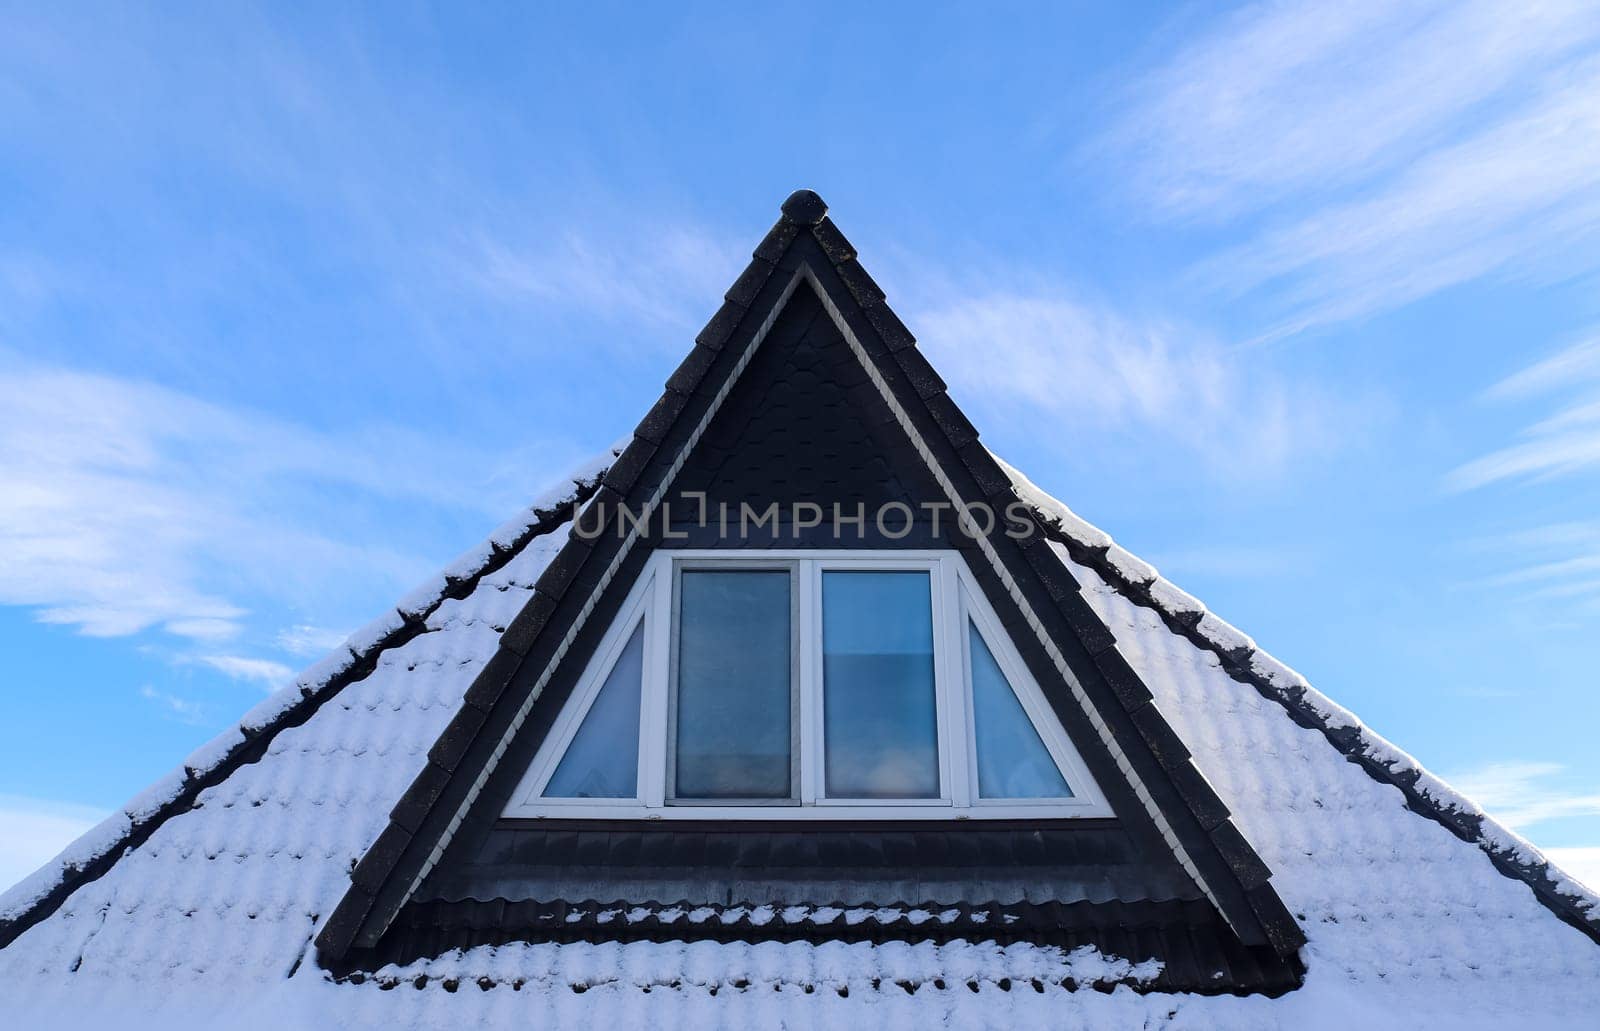 Roof window in velux style with black roof tiles by MP_foto71